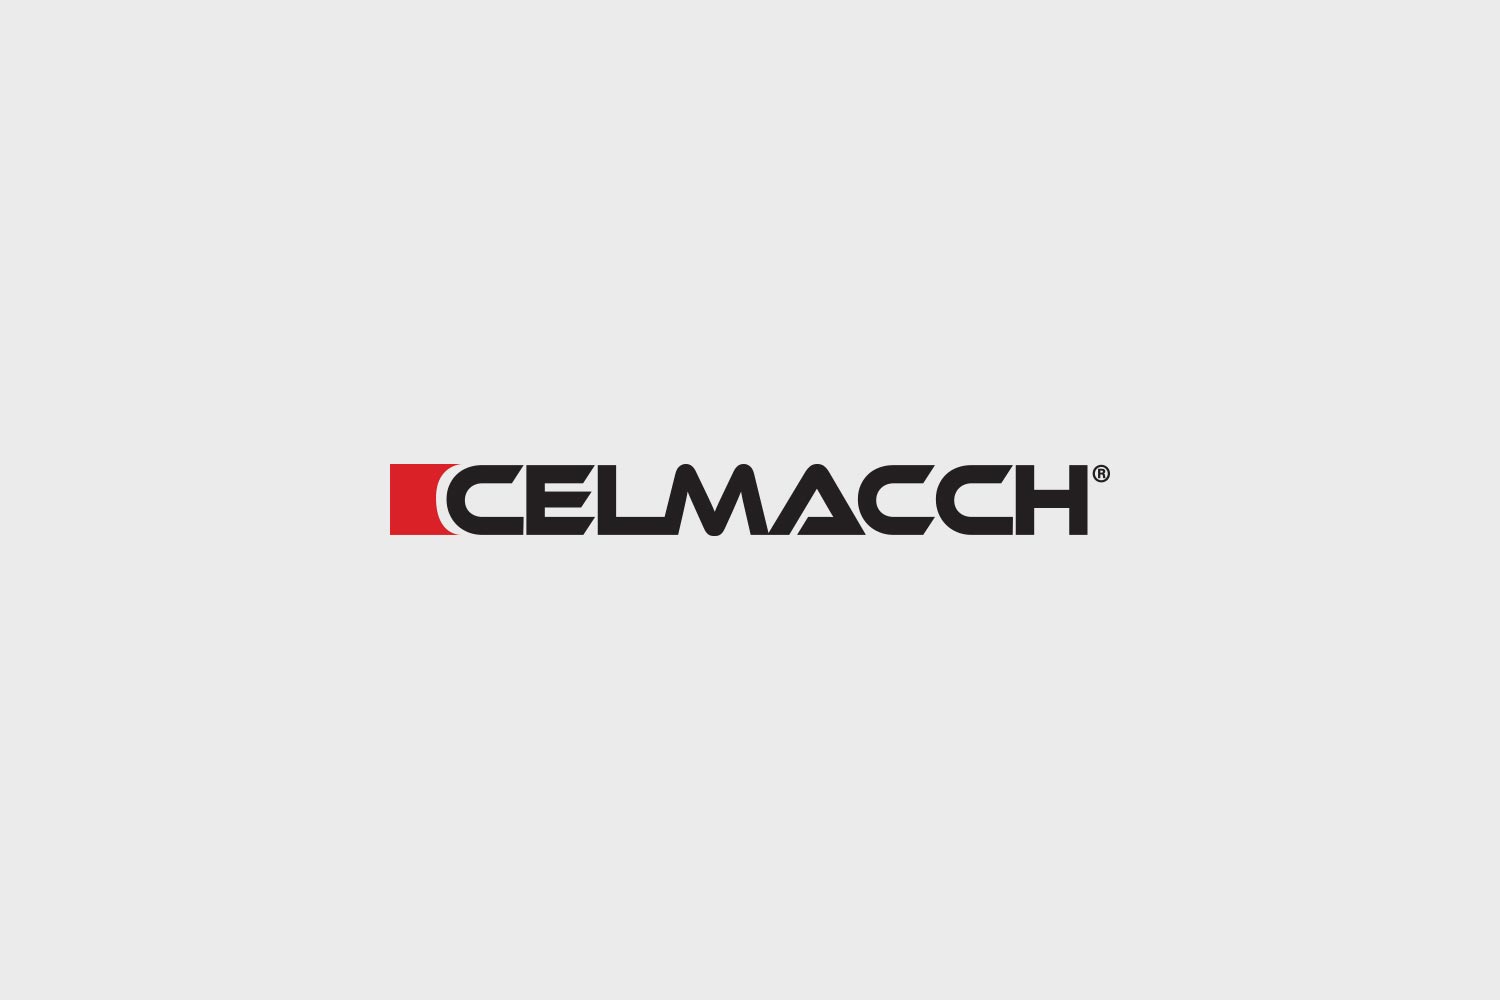 Celmacch-group